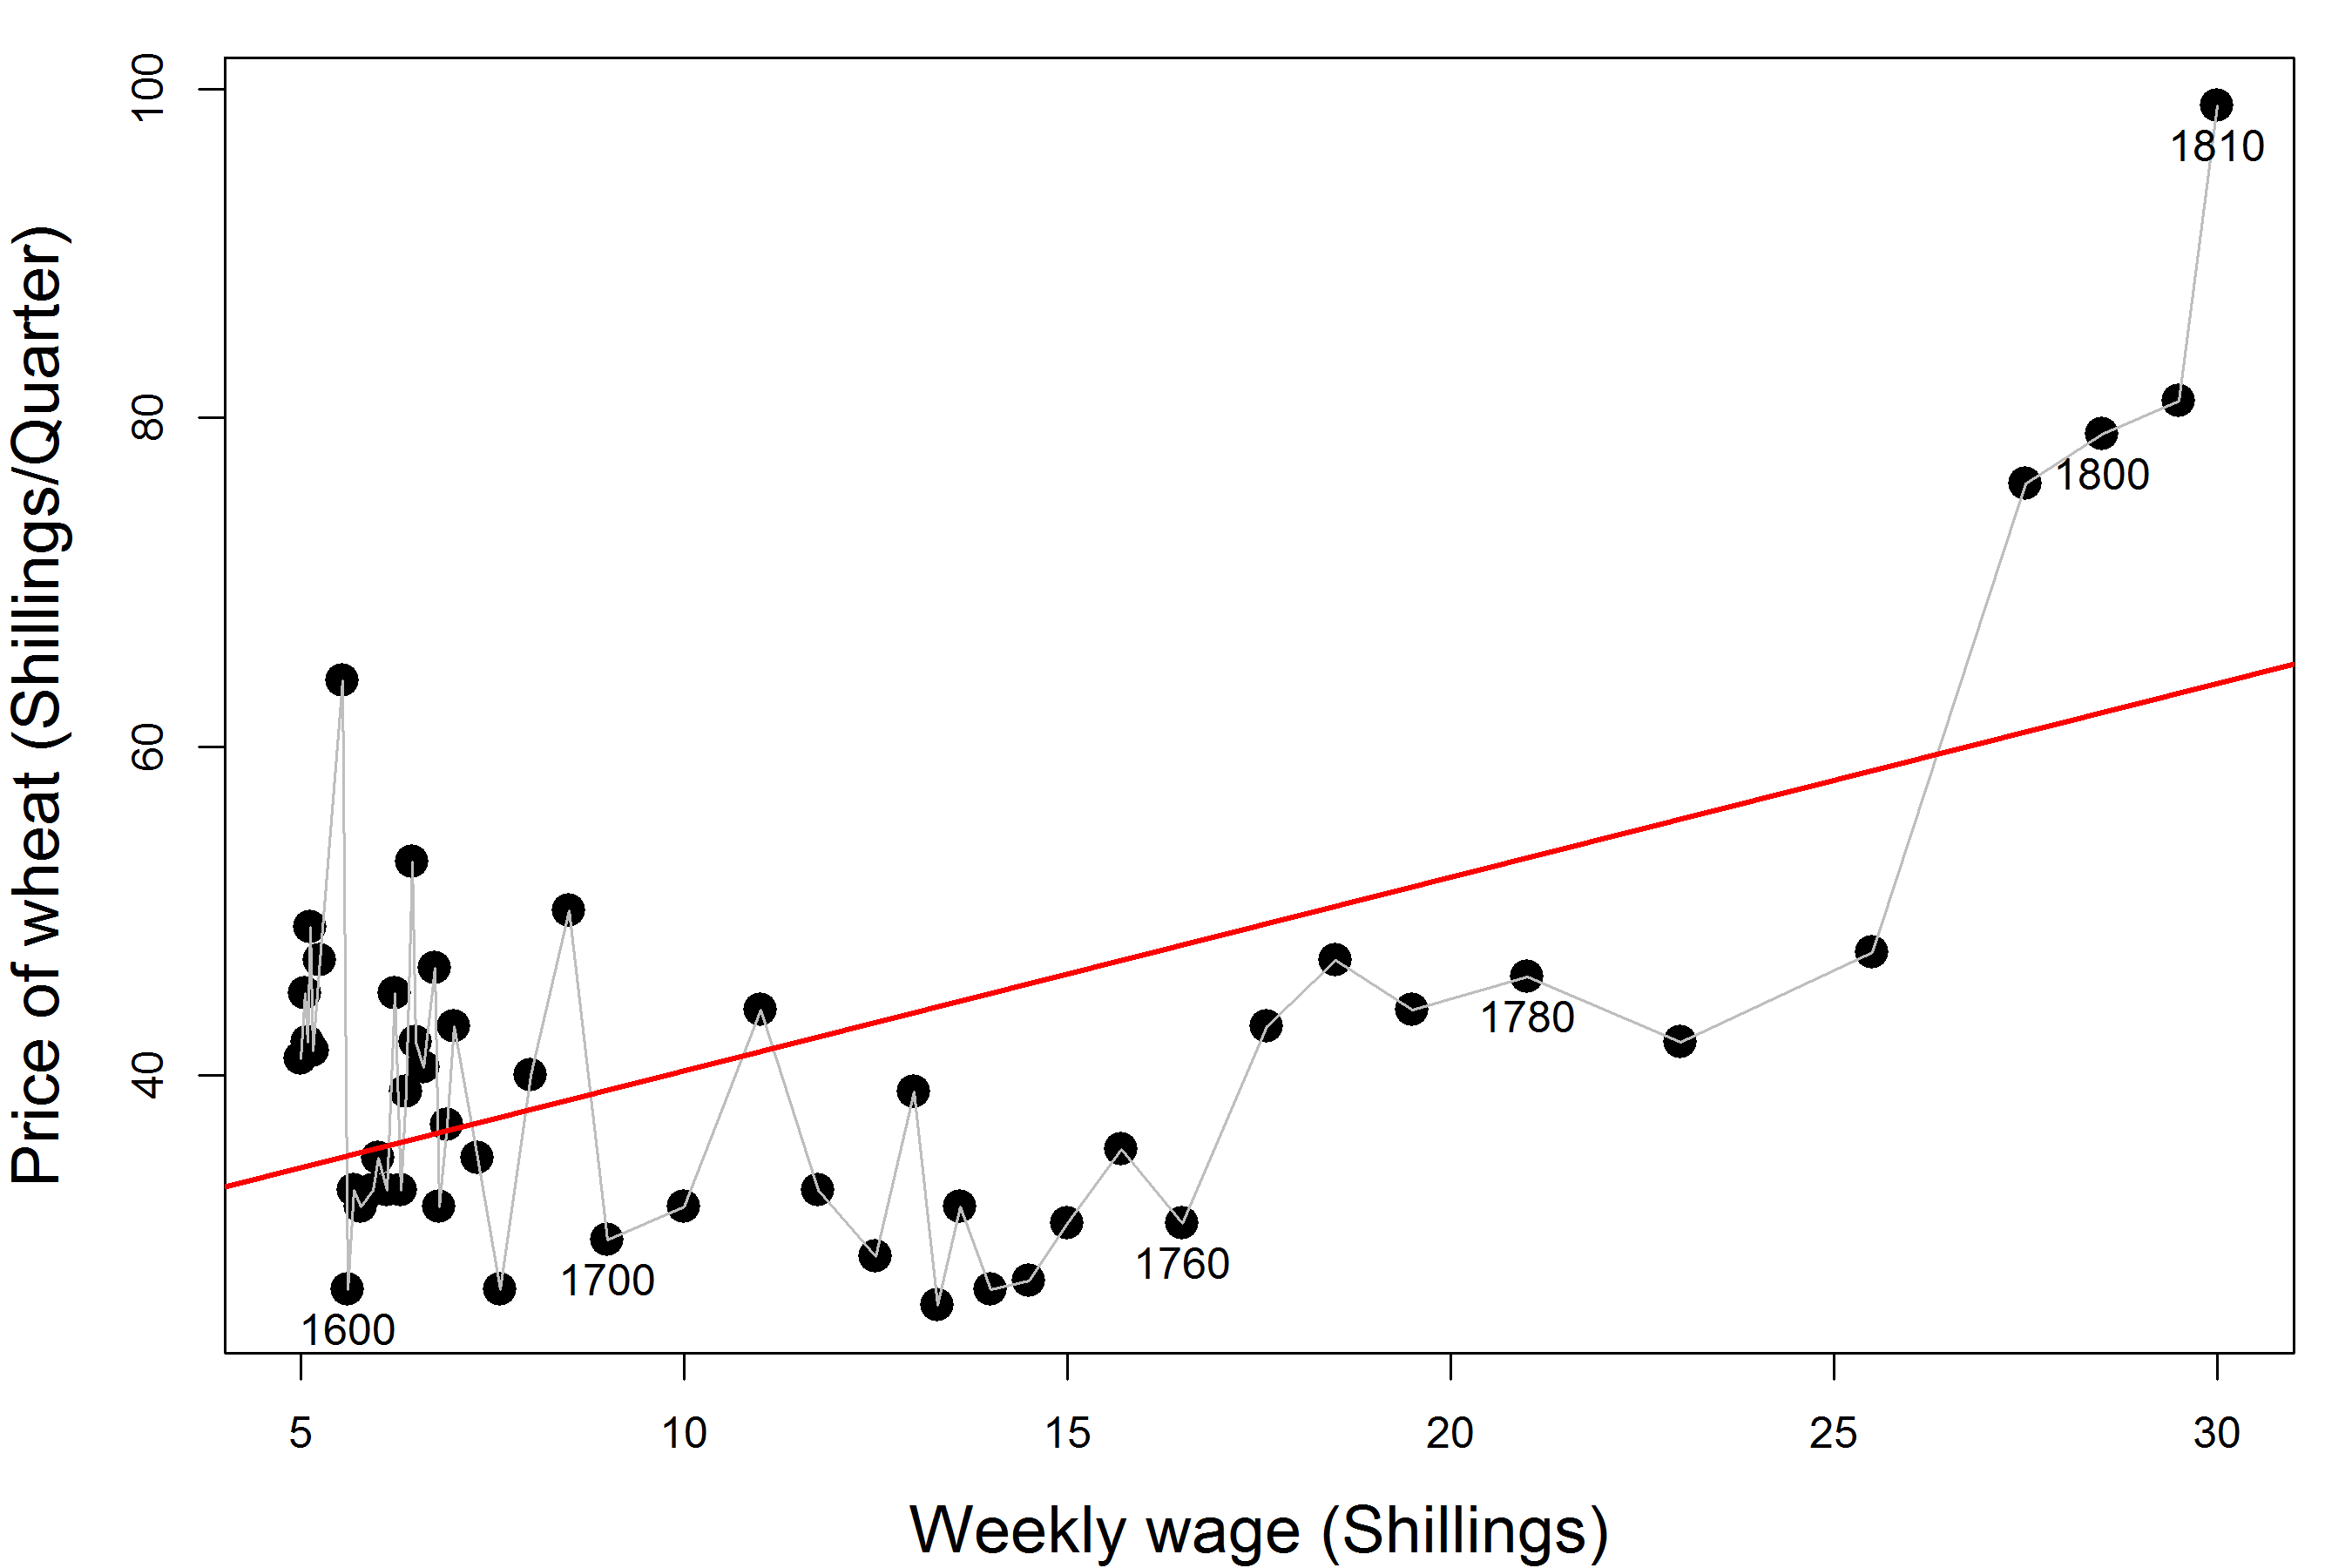 Scatterplot view: Scatterplot version of Playfair’s data, joining the points in time order, and showing the linear regression of price of wheat on wages.